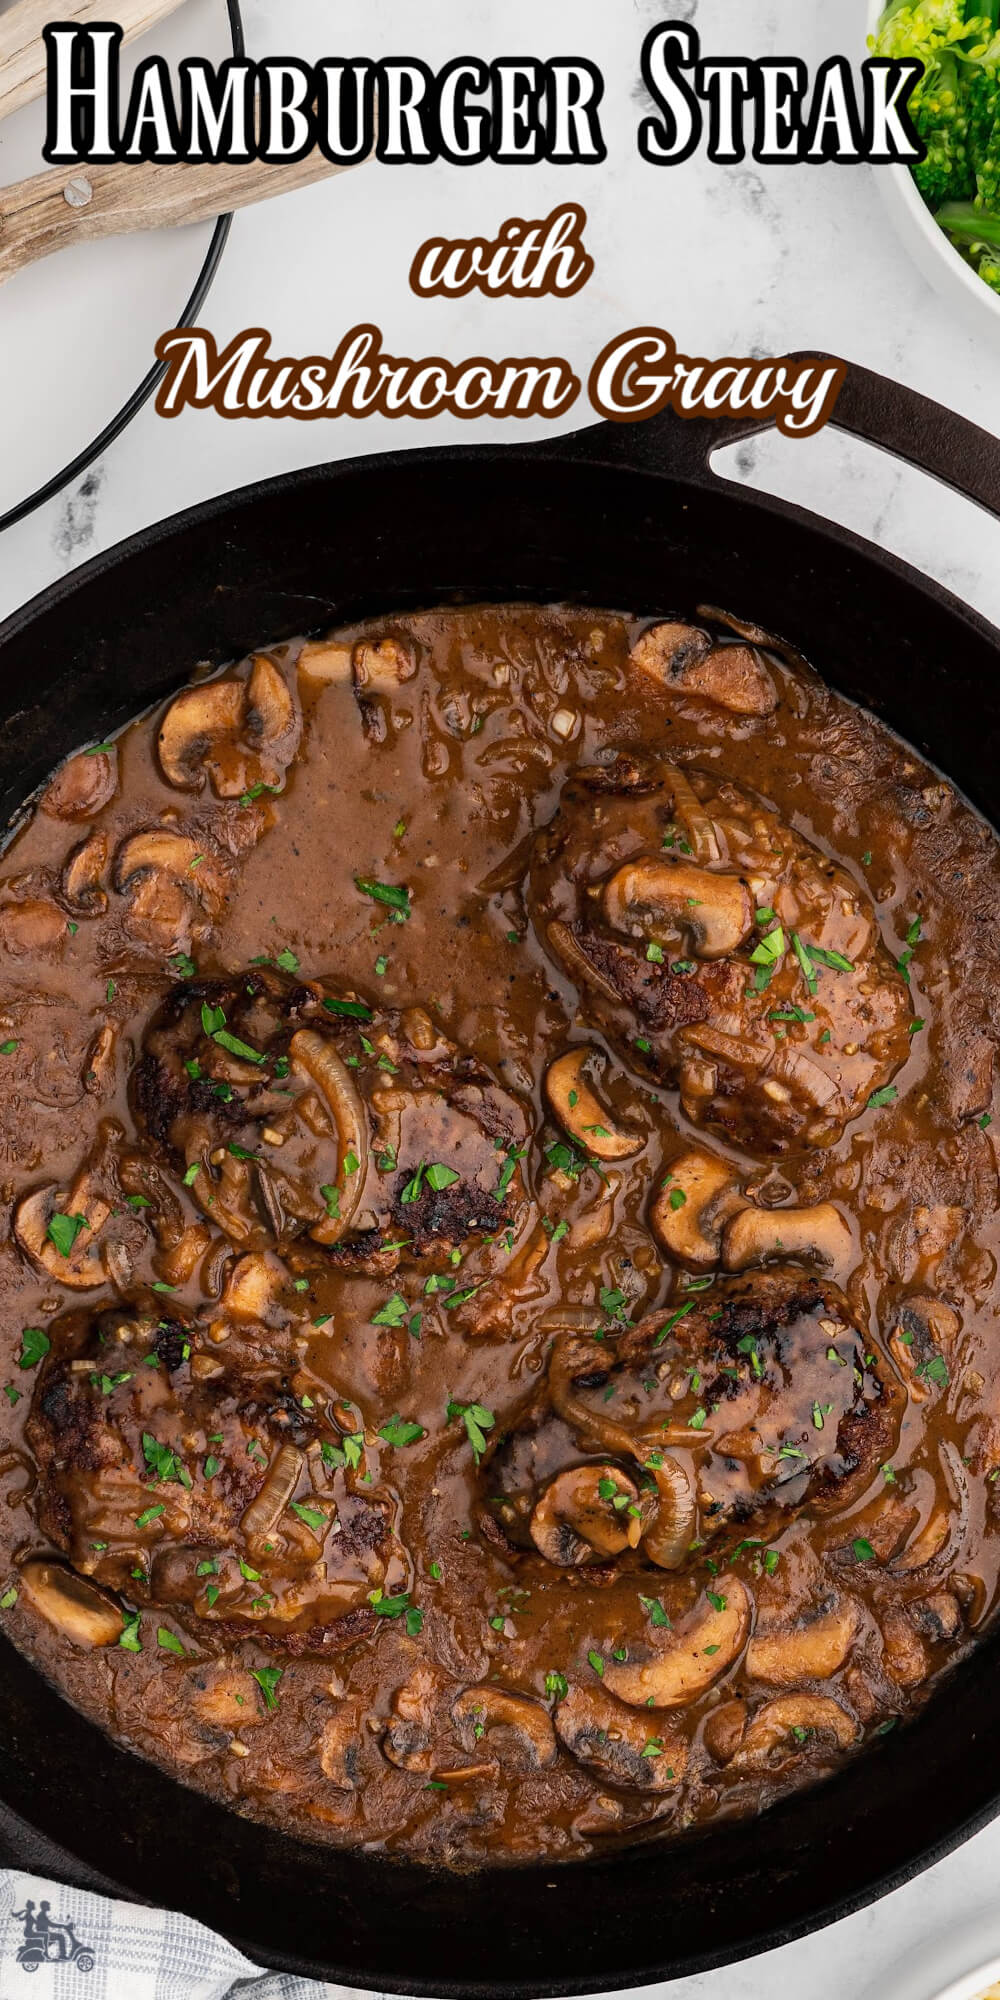 Hamburger Steak combines a steak-like ground beef patty with a rich onion and mushroom sauce, served over rice, mashed potato, or pasta. It’s the kind of dish that’s loved by all and is super simple to make as a midweek meal or for a special occasion. Budget friendly meat with a high dollar flavor.